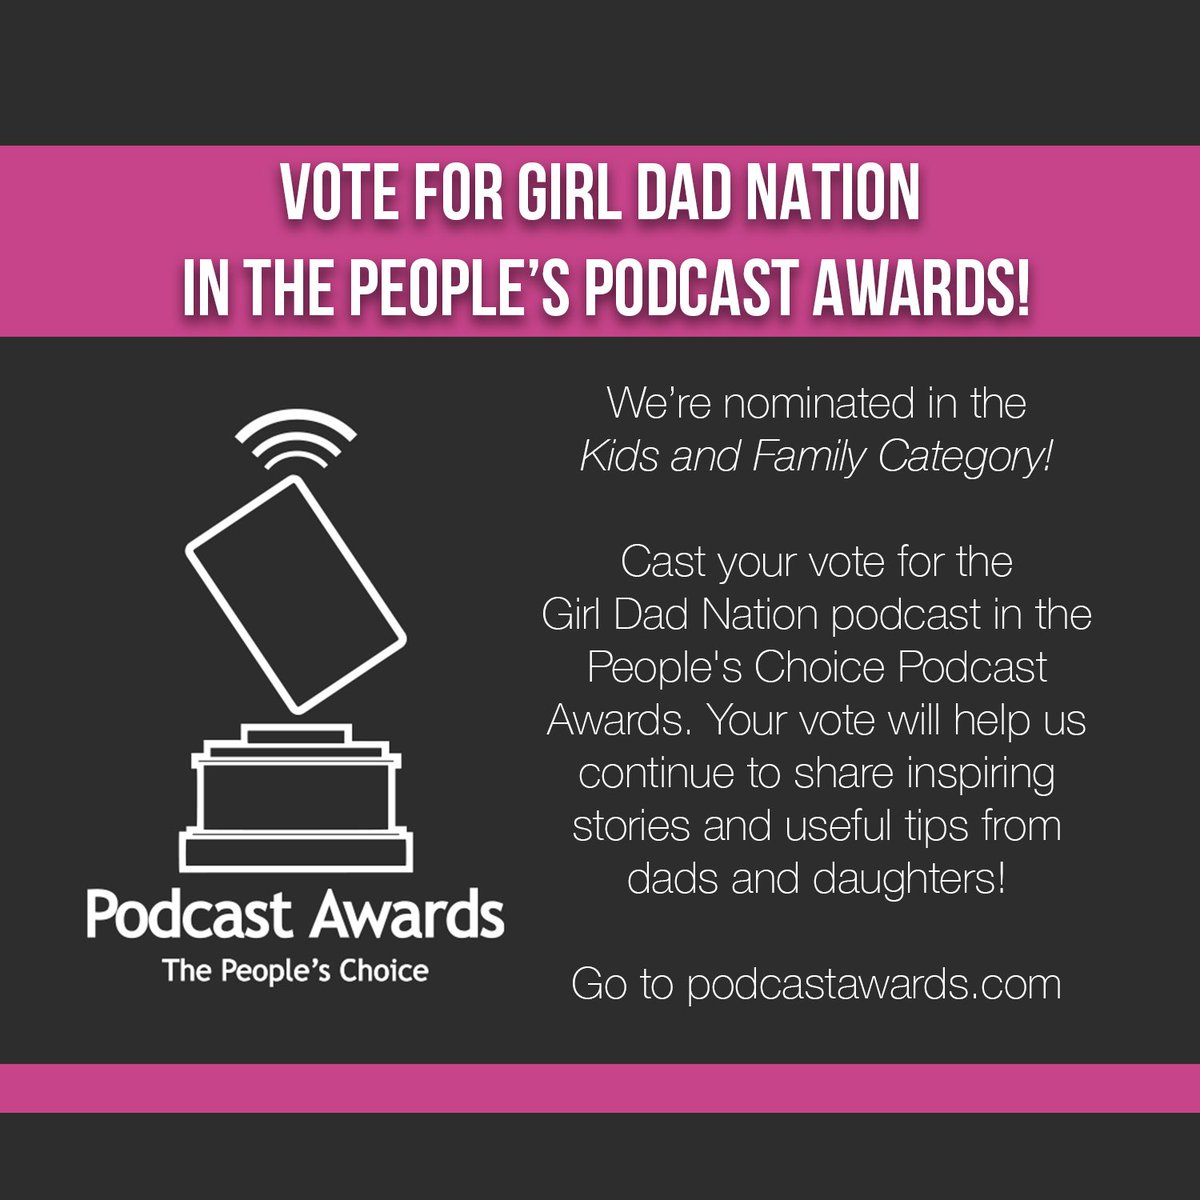 We need your votes!

Girl Dad Nation is proud to be nominated in Kids and Family category for the People’s Choice Podcast Awards. Vote for Girl Dad Nation and help us continue sharing inspiring stories from dads and daughters. 

Thank you!

#girldad #girldadnation
#podcastawards